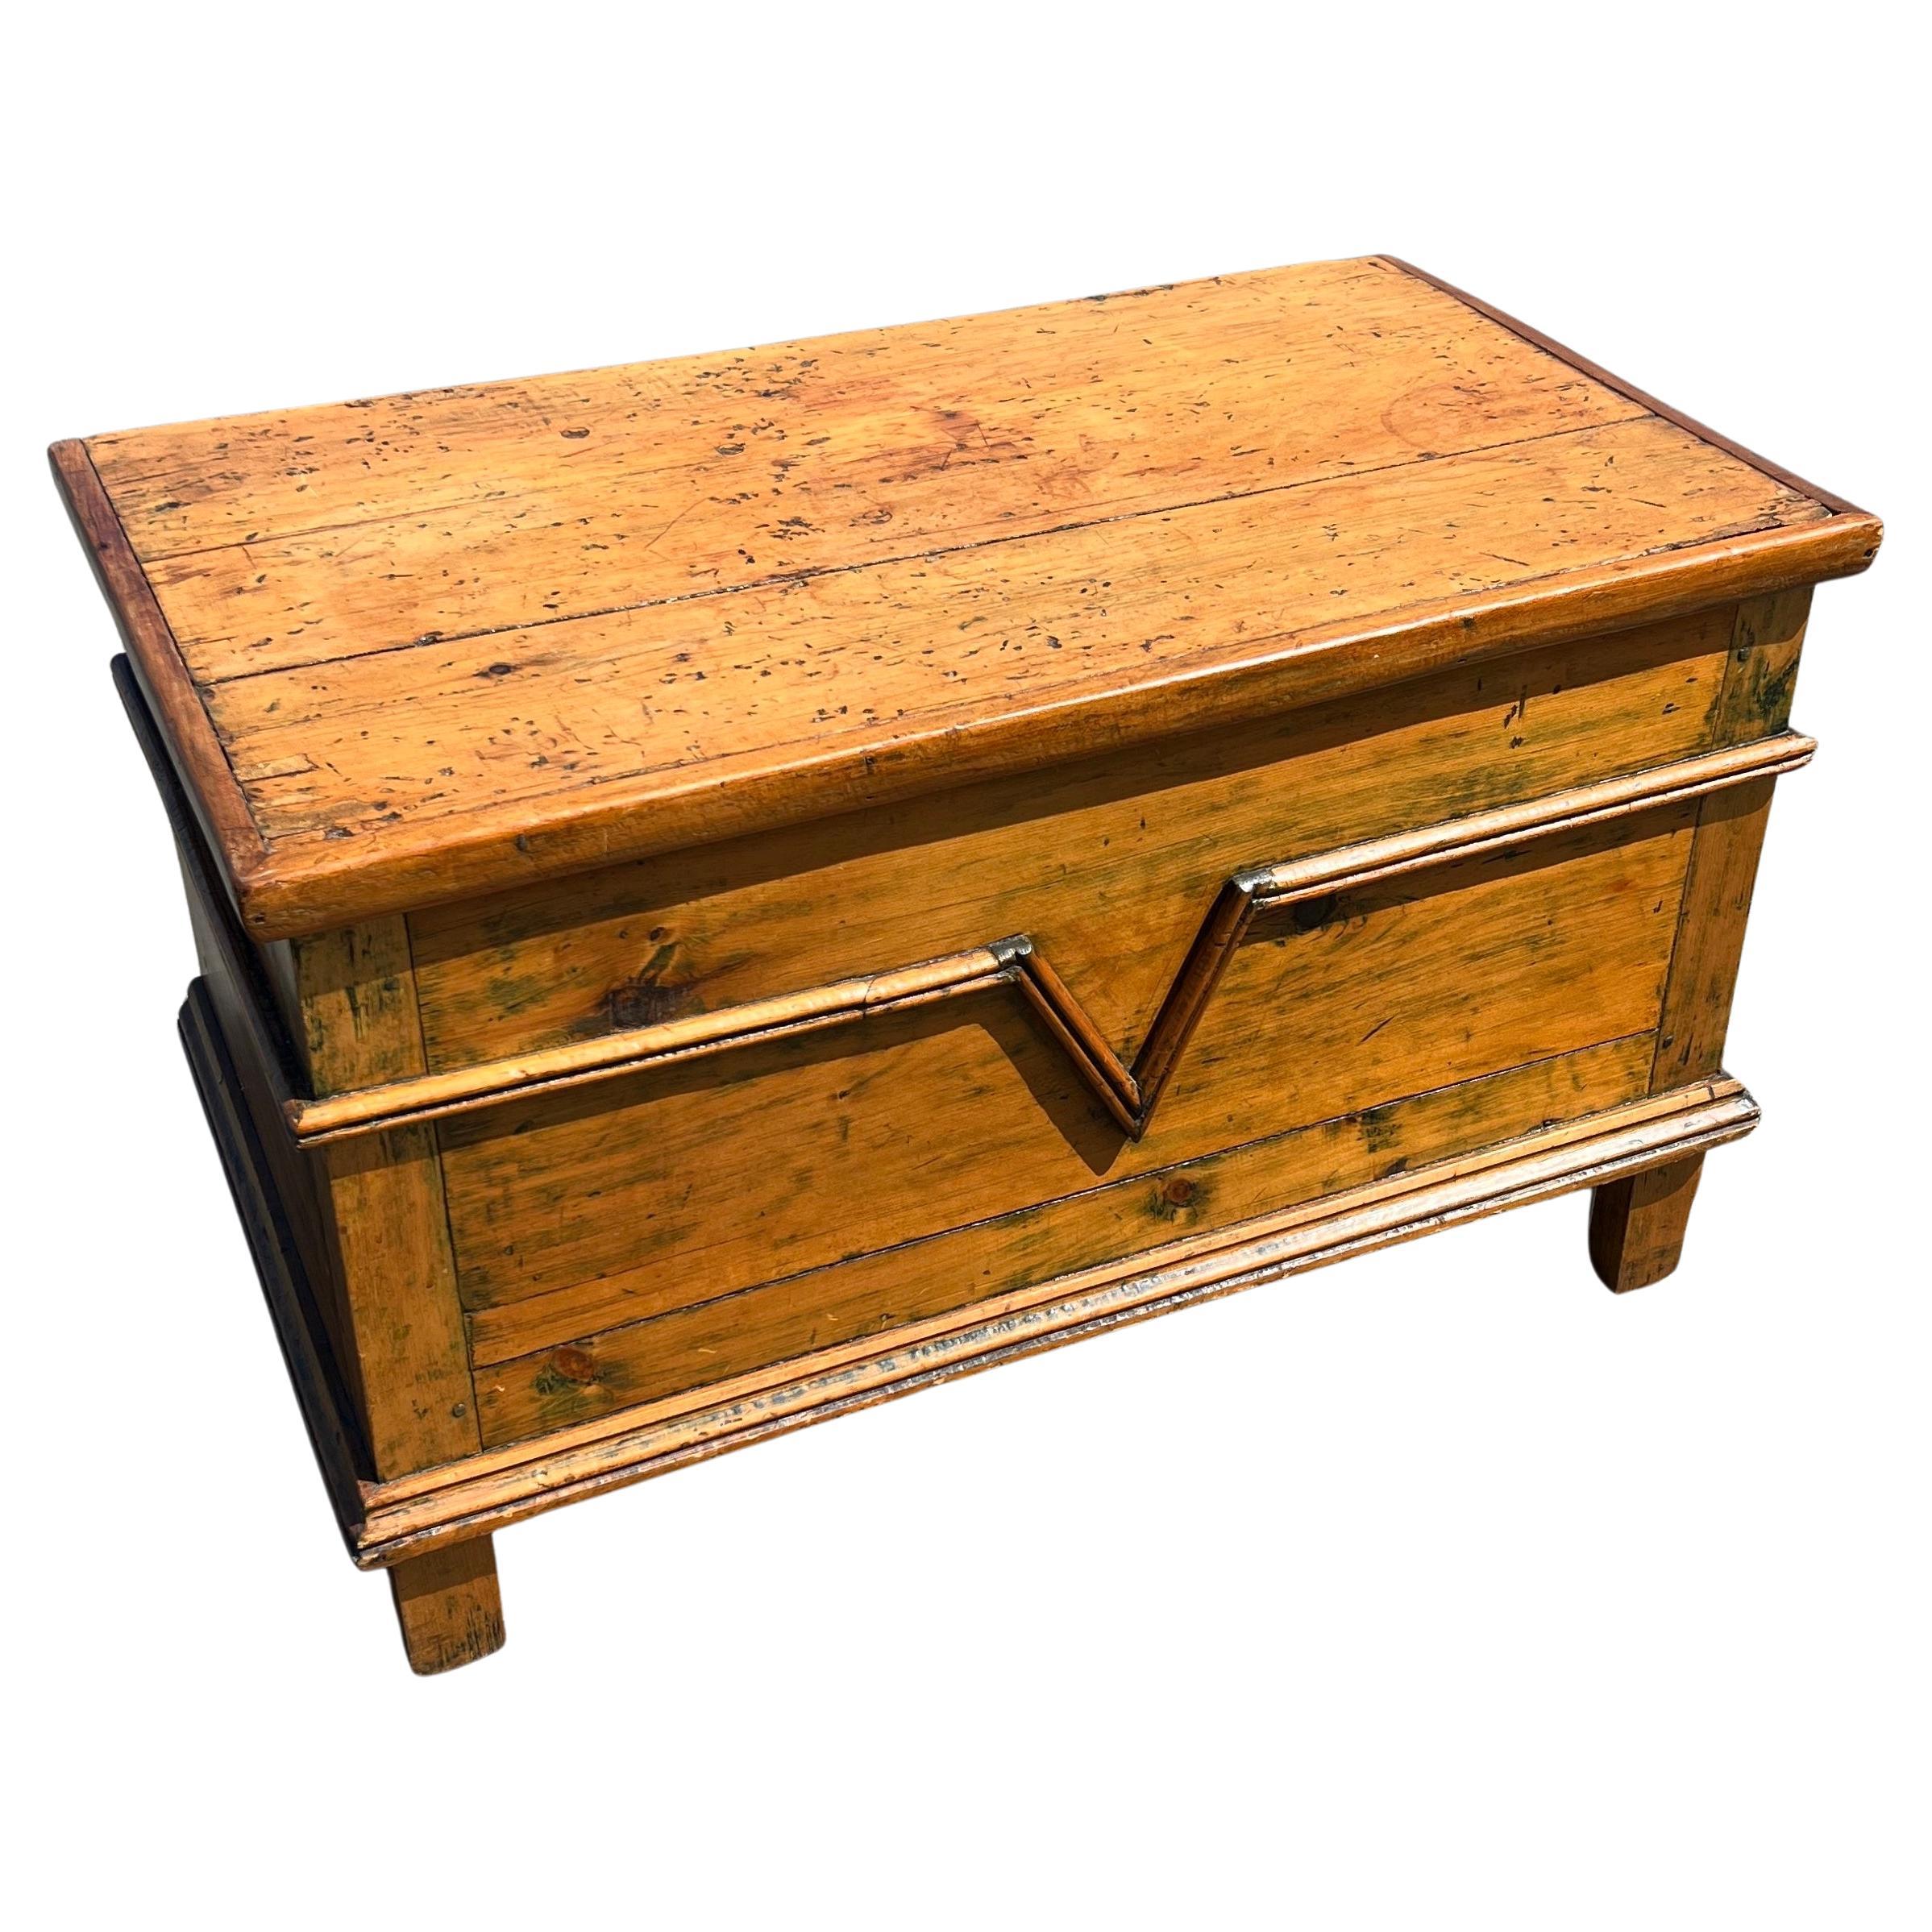 19th Century Pine Chest with Applied "v" Molding